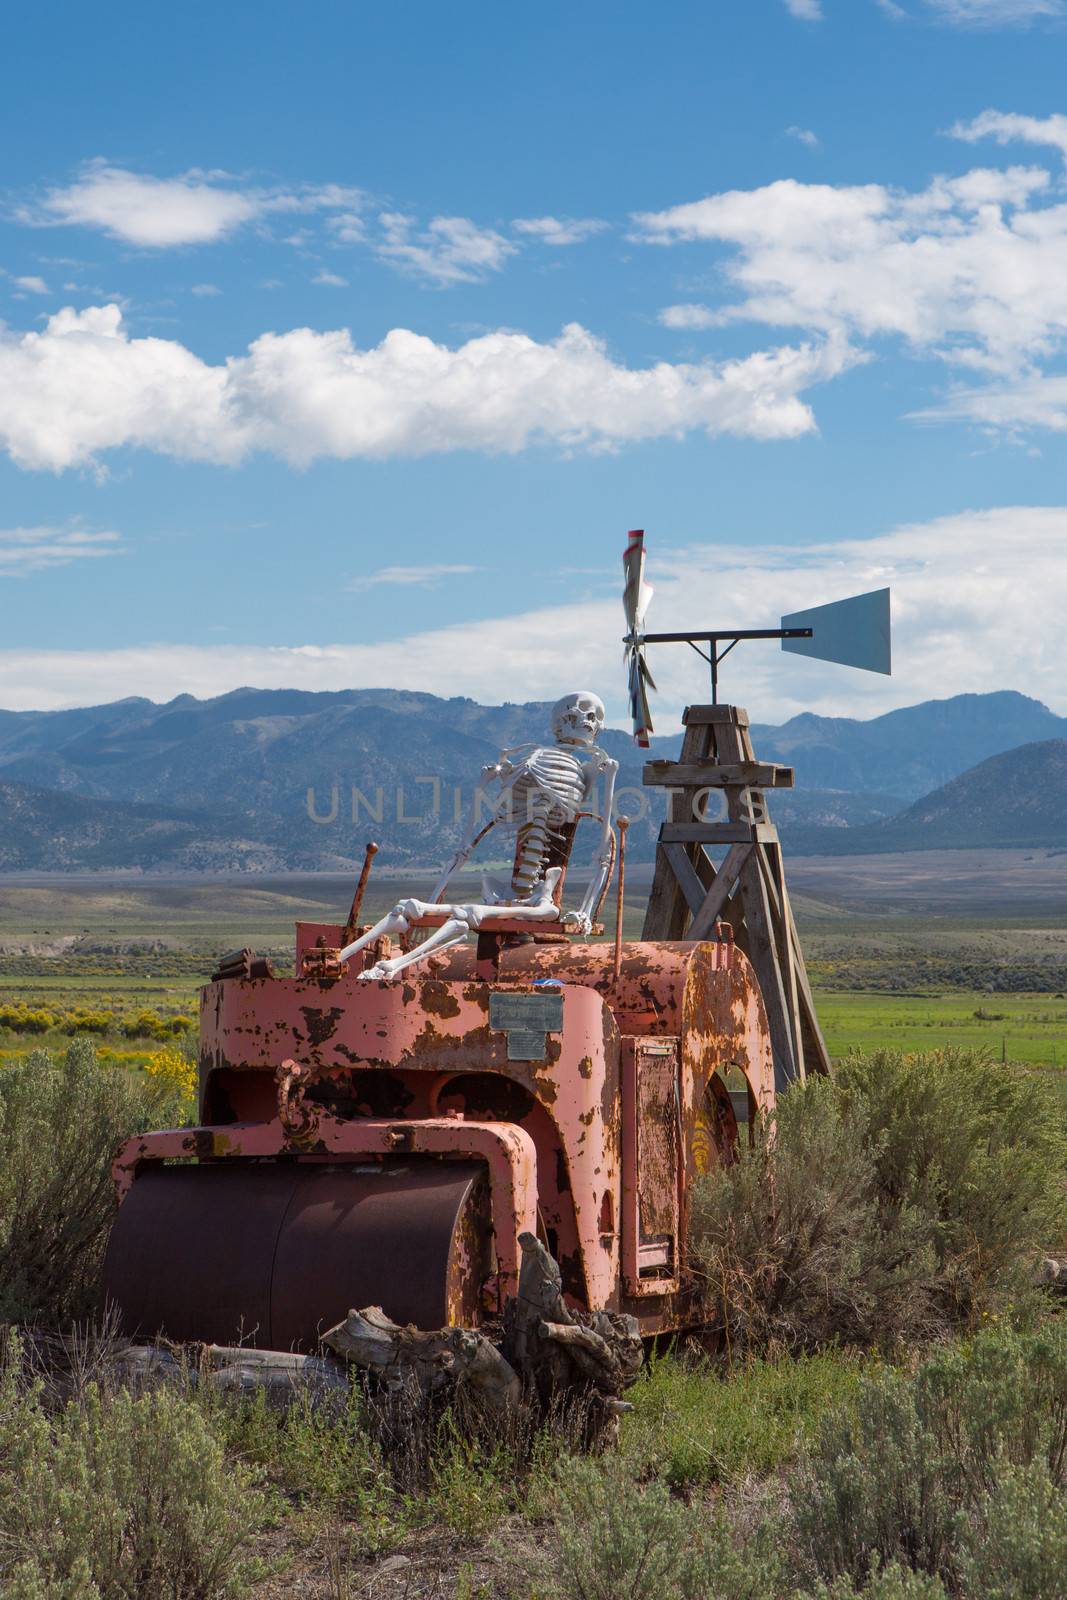 Skeleton sitting on a vintage tractor in Utah with mountains by watchtheworld